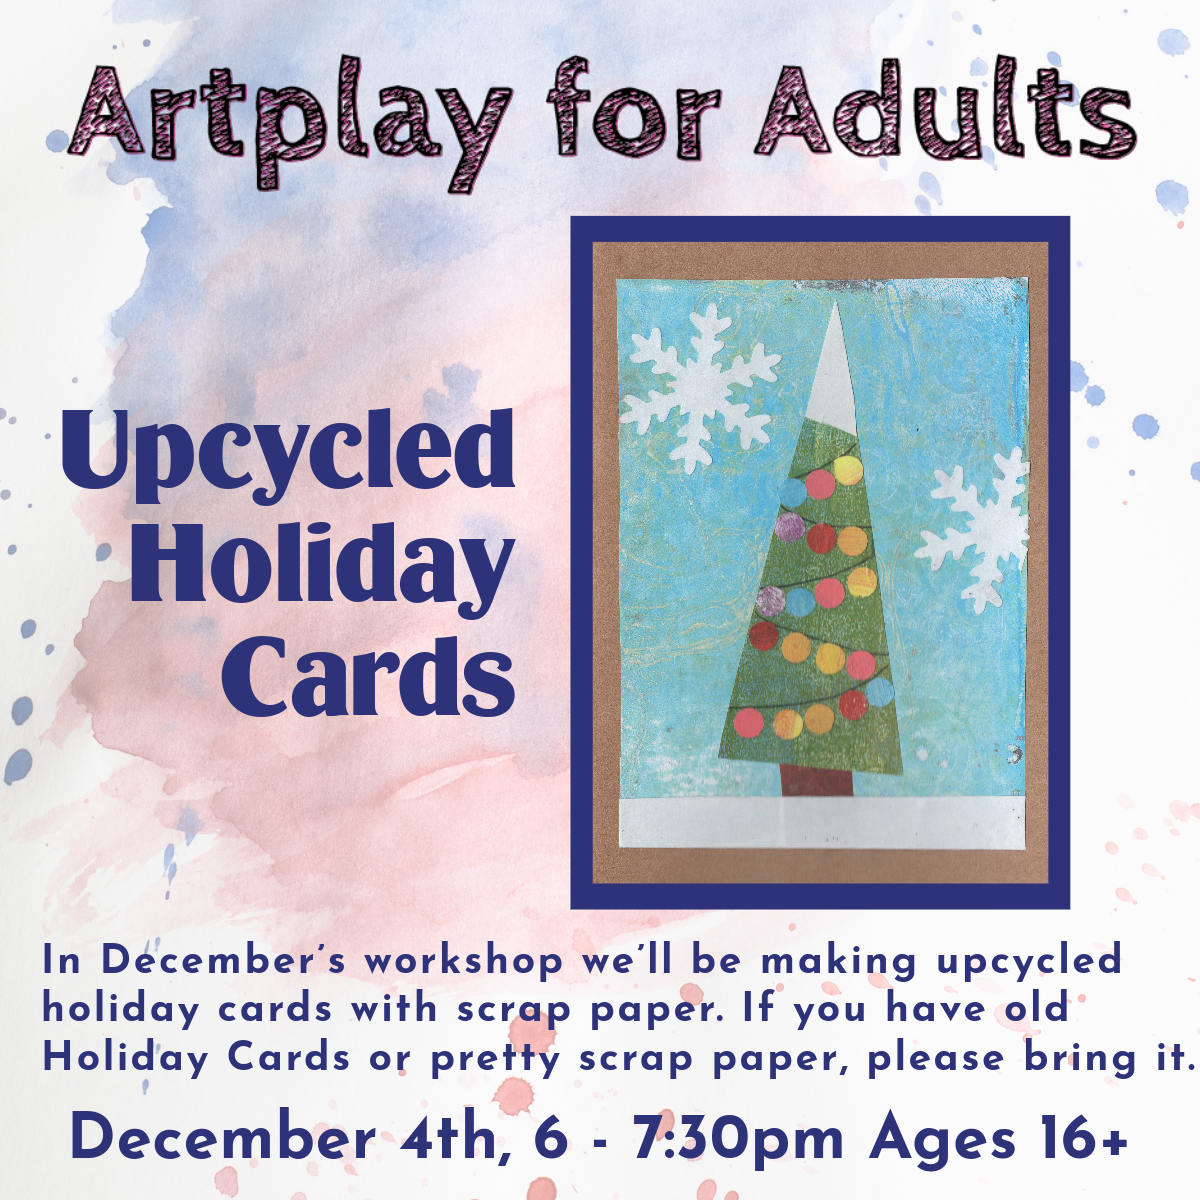 December Artplay will be making upcycled holiday cards.